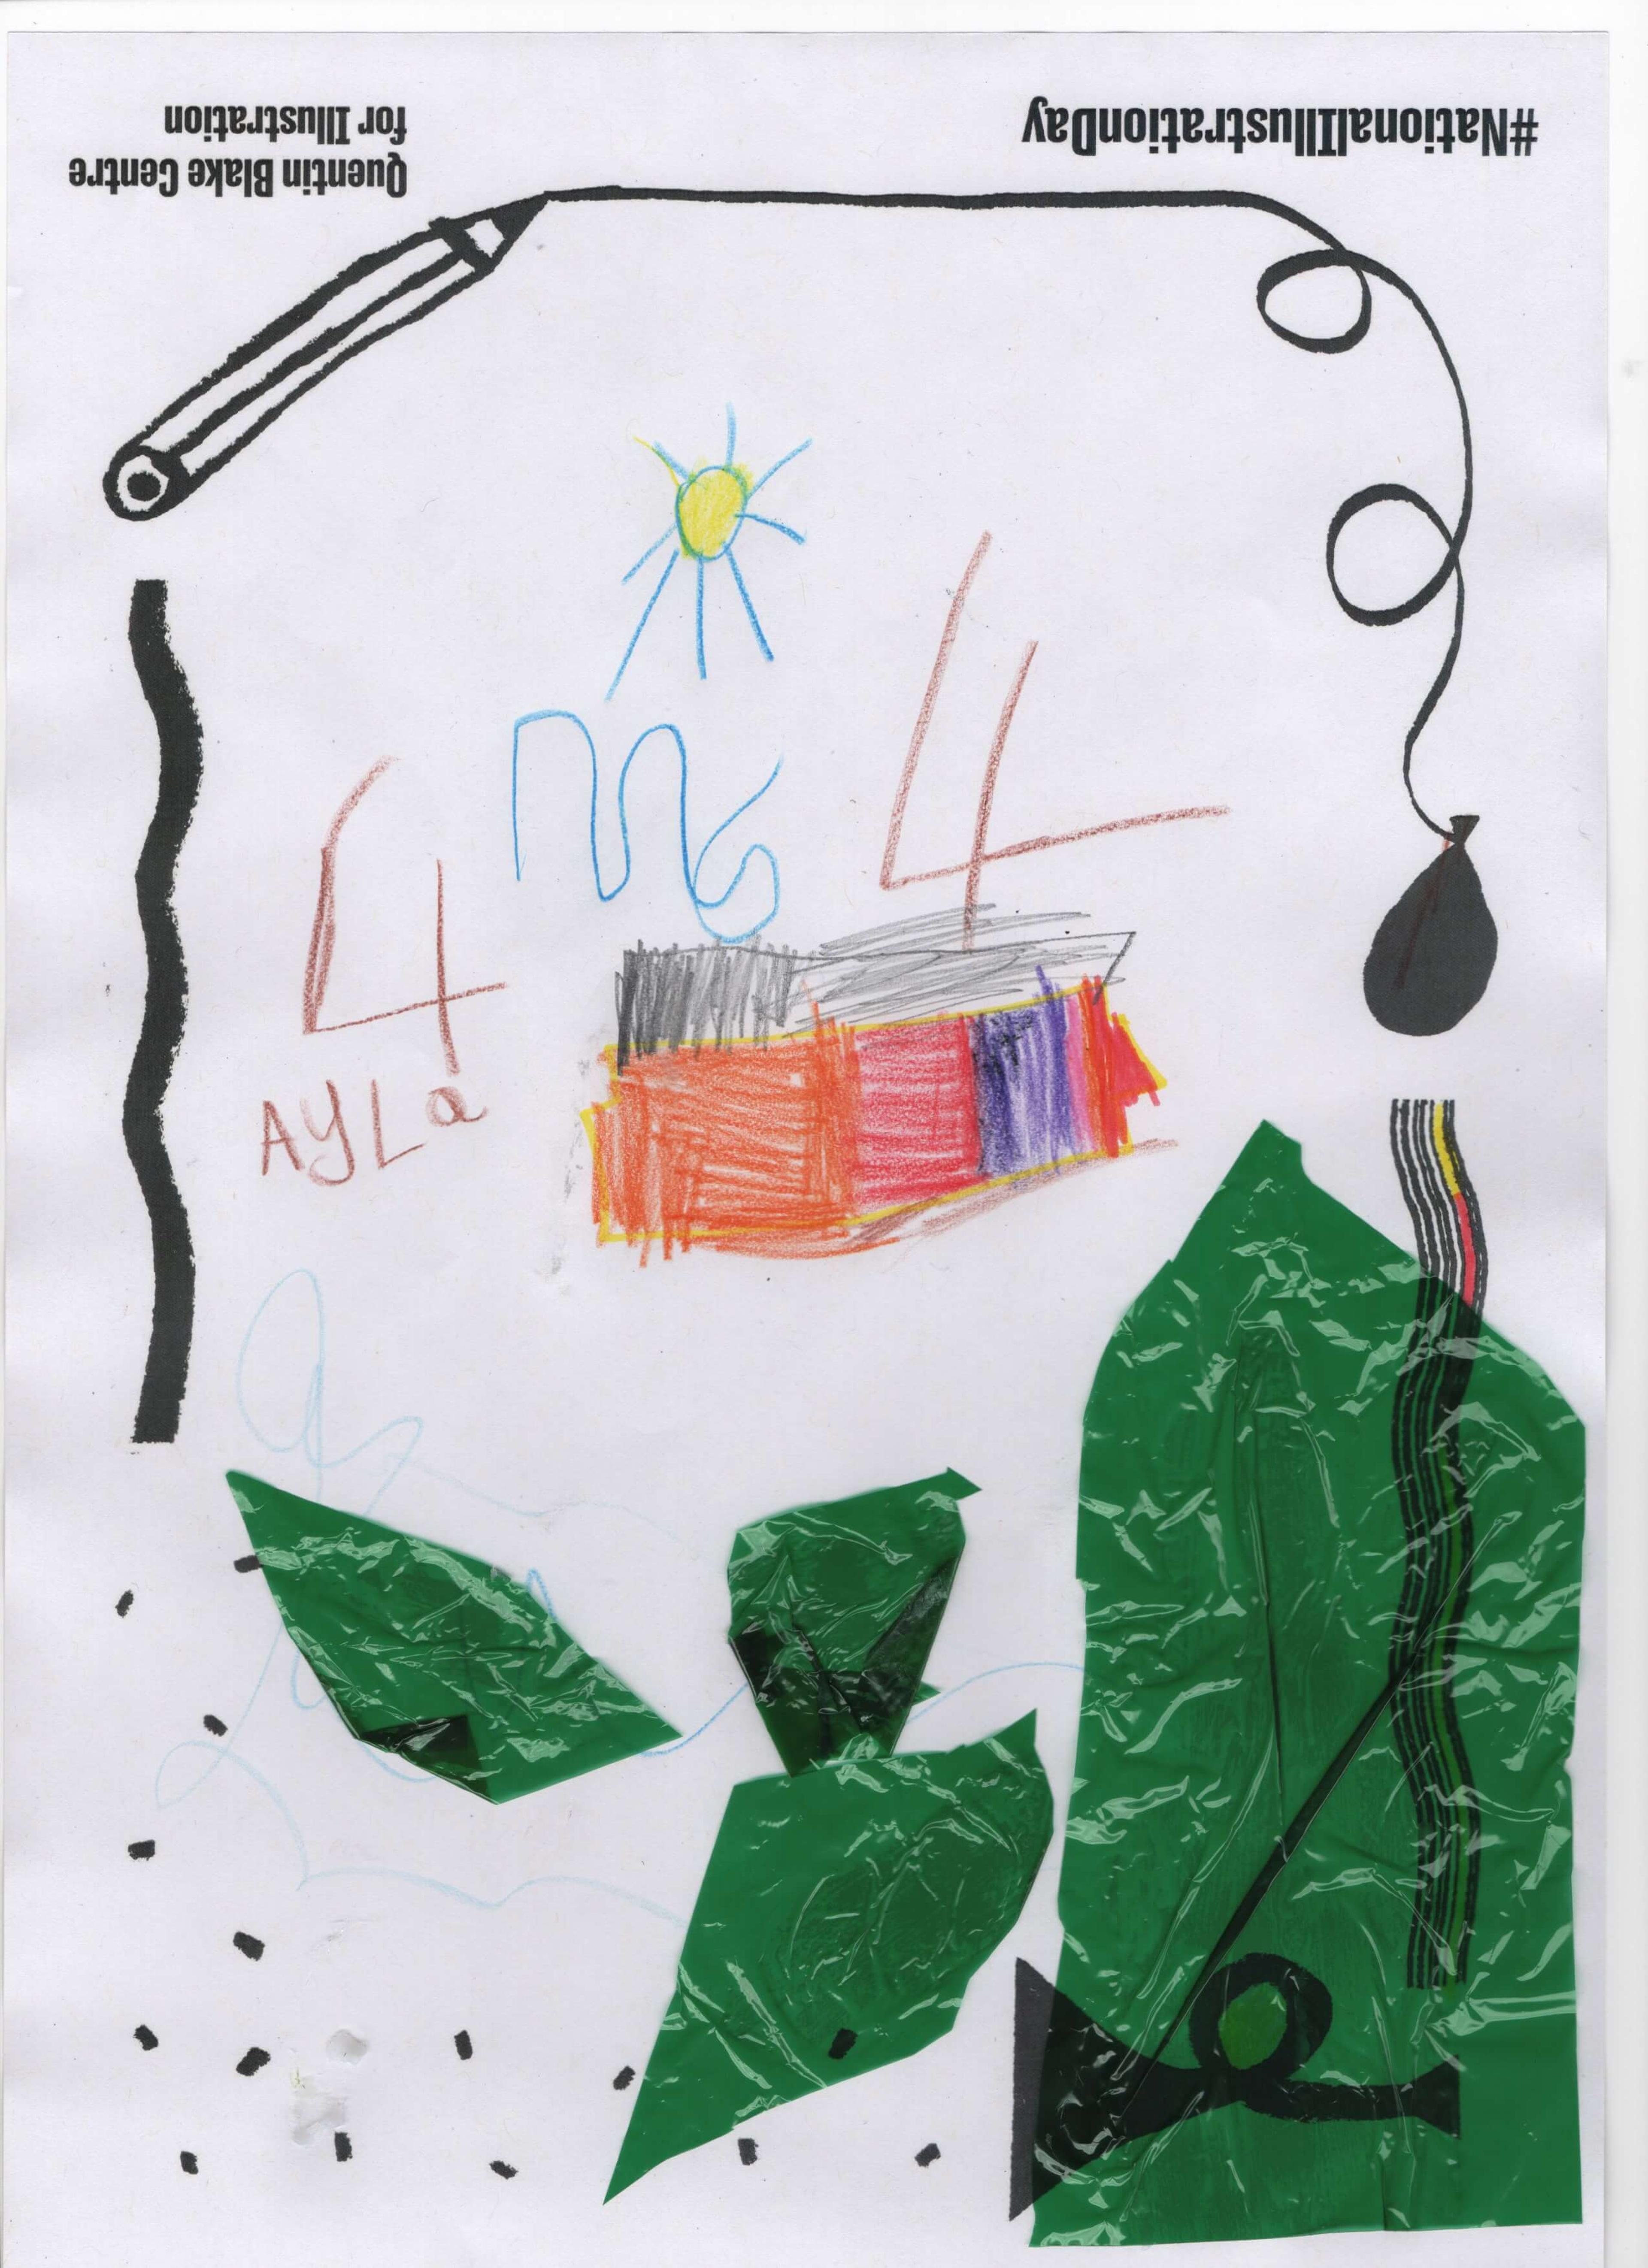 Abstract picture by a young child featuring stuck-on blocks of green cellophane, colour pencil marks, and a small sun.